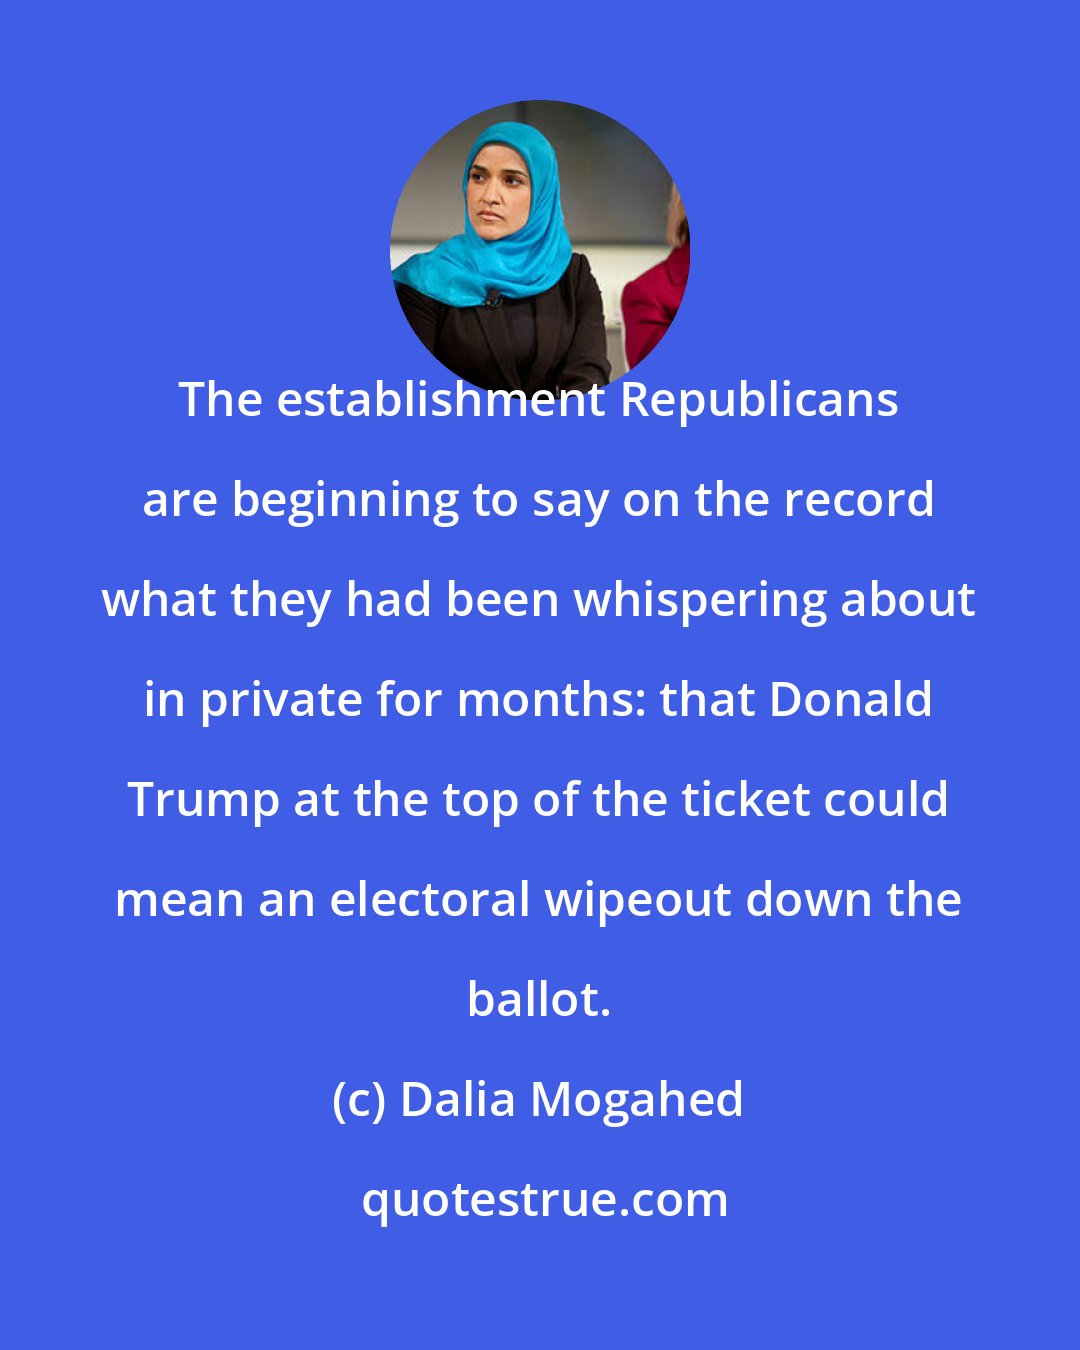 Dalia Mogahed: The establishment Republicans are beginning to say on the record what they had been whispering about in private for months: that Donald Trump at the top of the ticket could mean an electoral wipeout down the ballot.